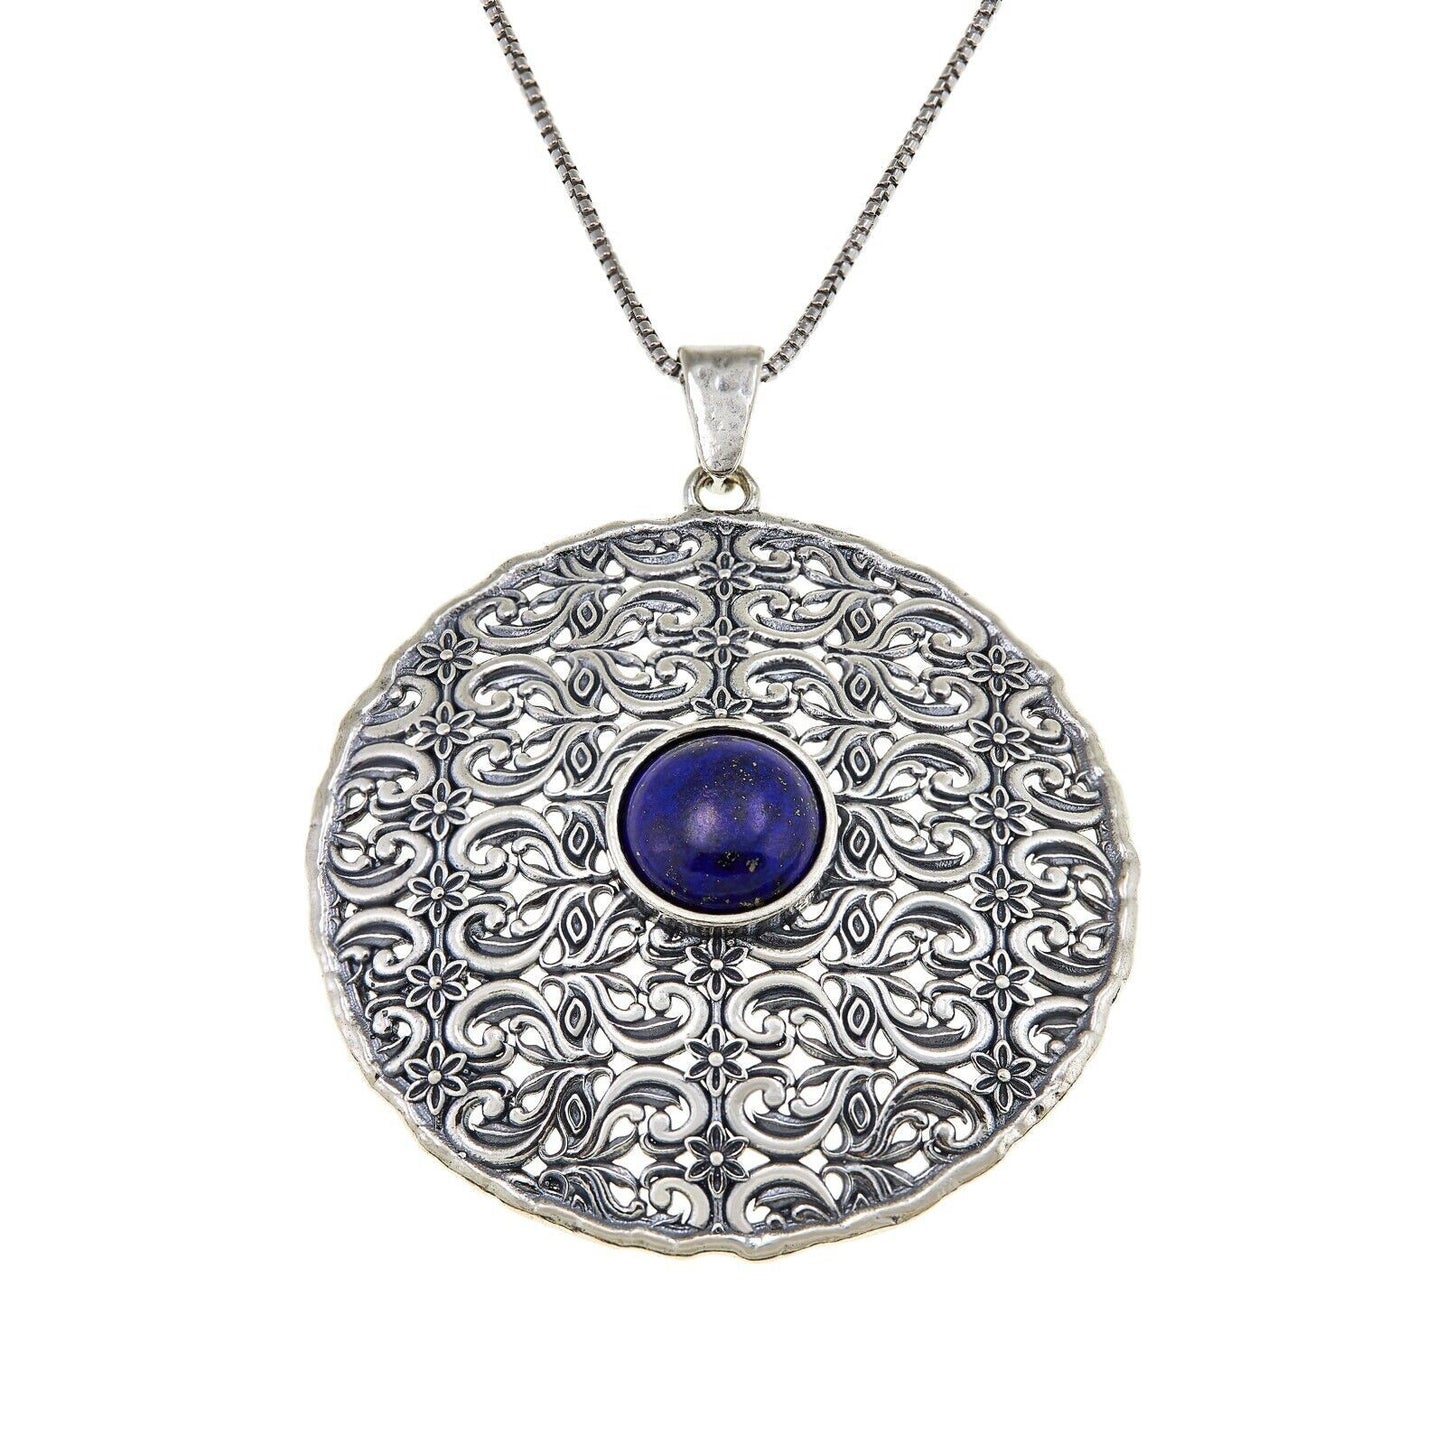 LiPaz Sterling Silver Lapis Circle Pendant with Chain. 24"